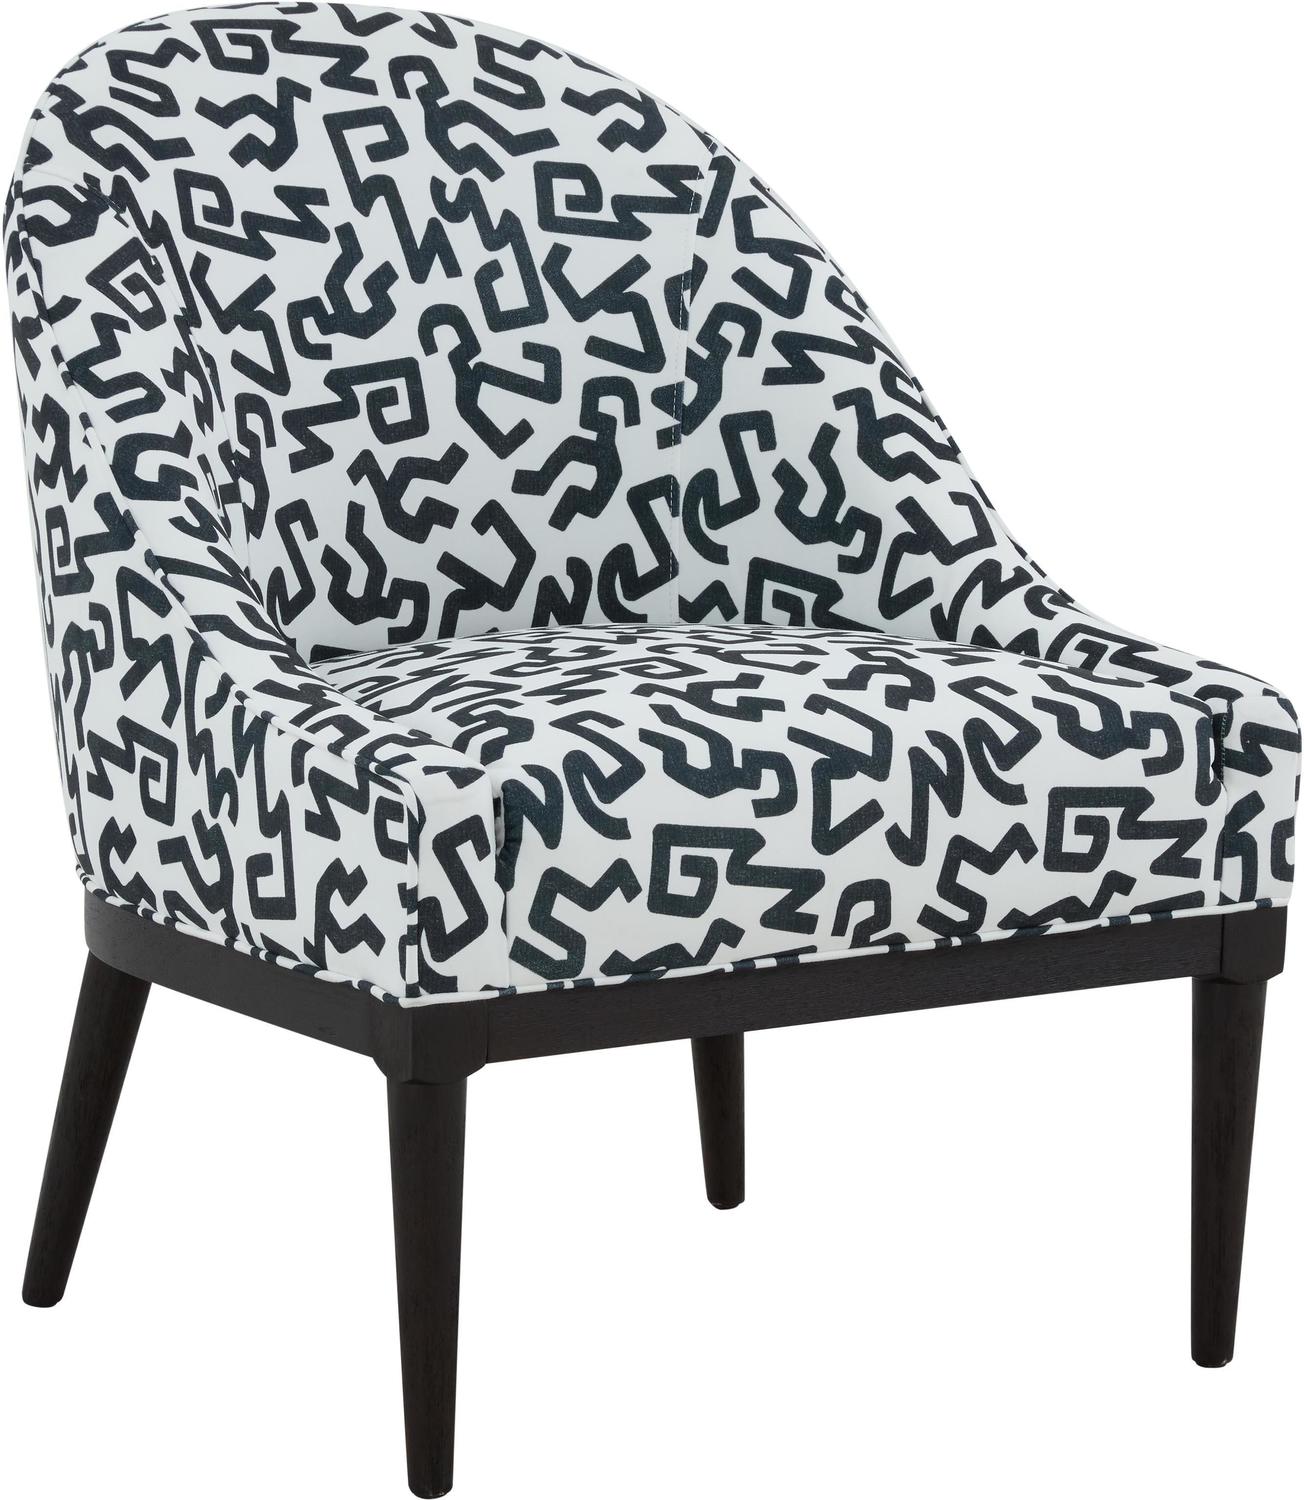 Tov Furniture Accent Chairs Chairs Black and White